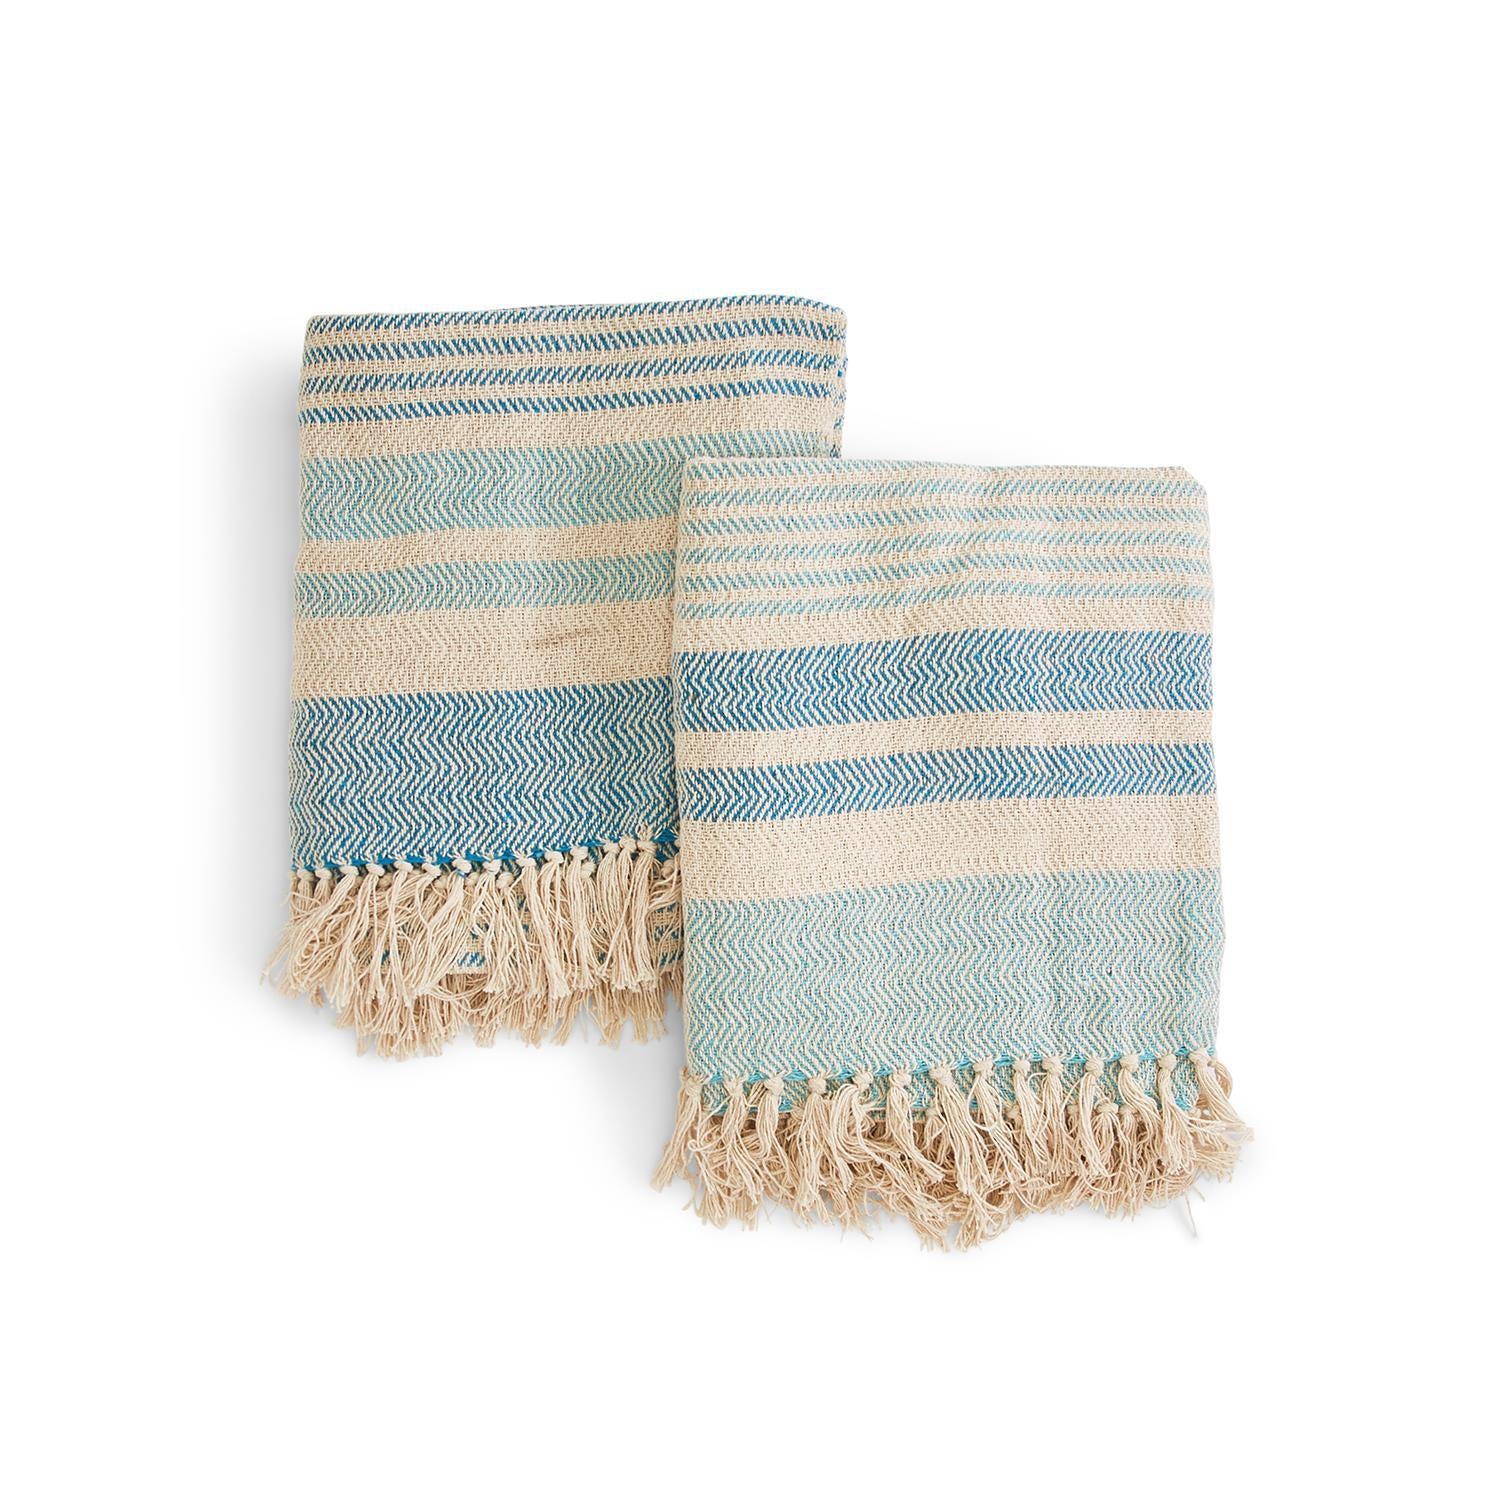 Striped Throw with Fringe, Asst 2 Designs